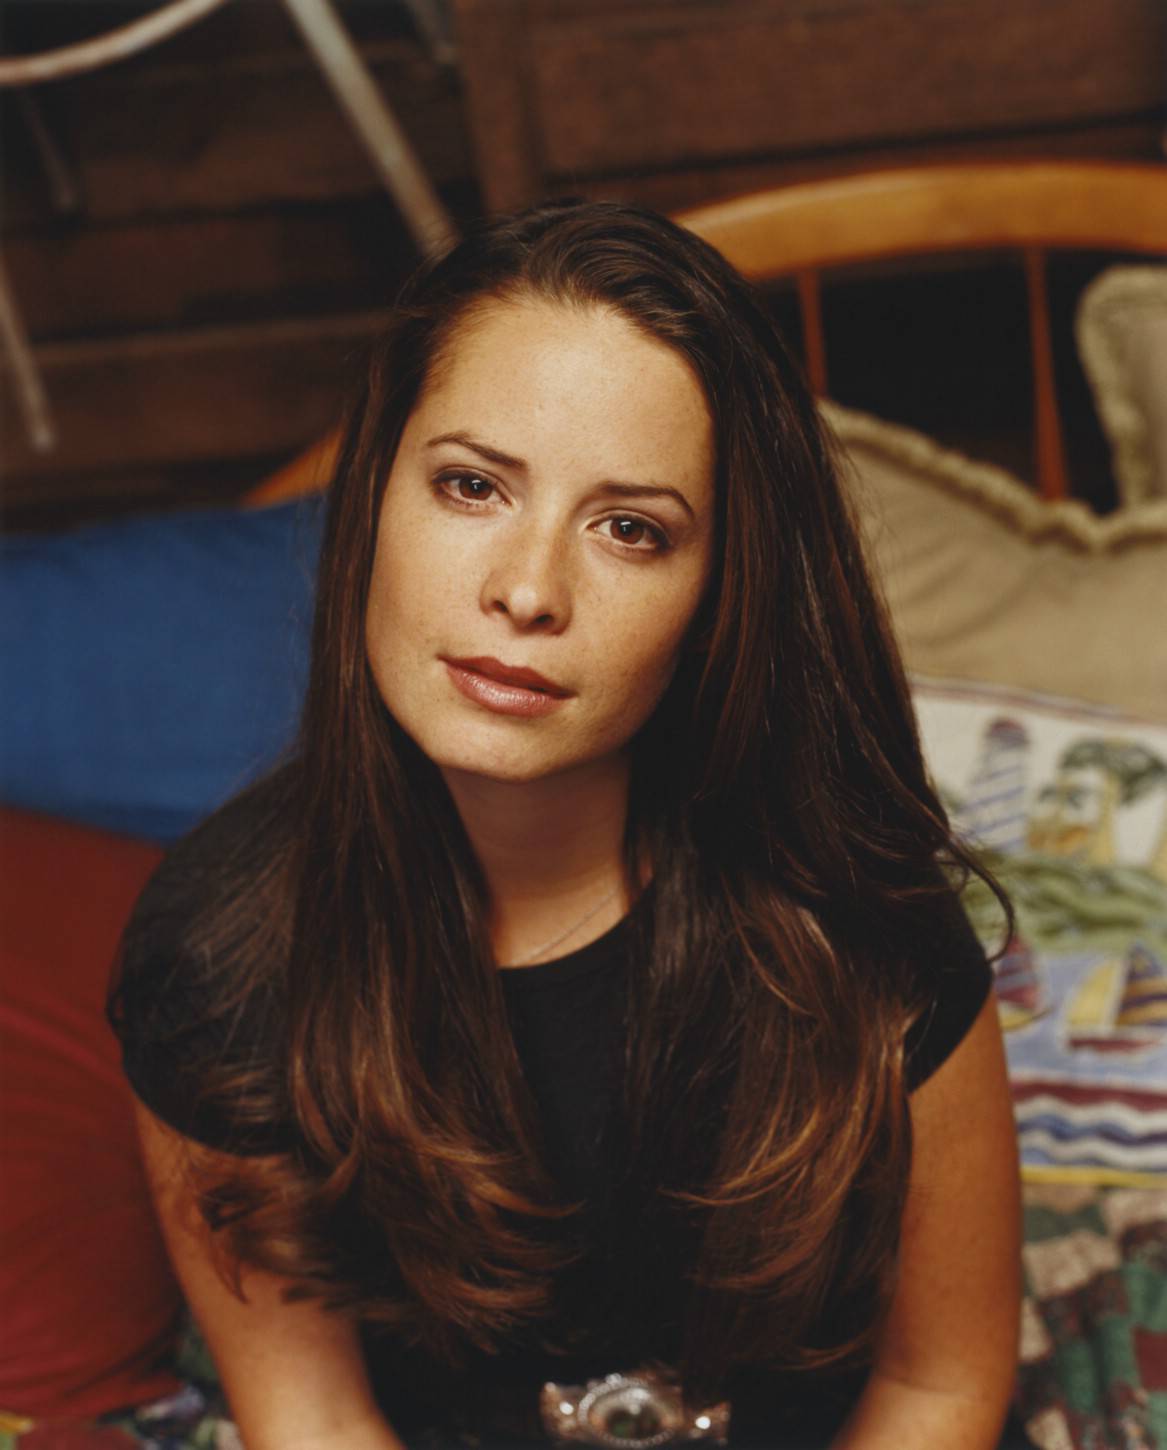 holly-marie-combs-wallpaper